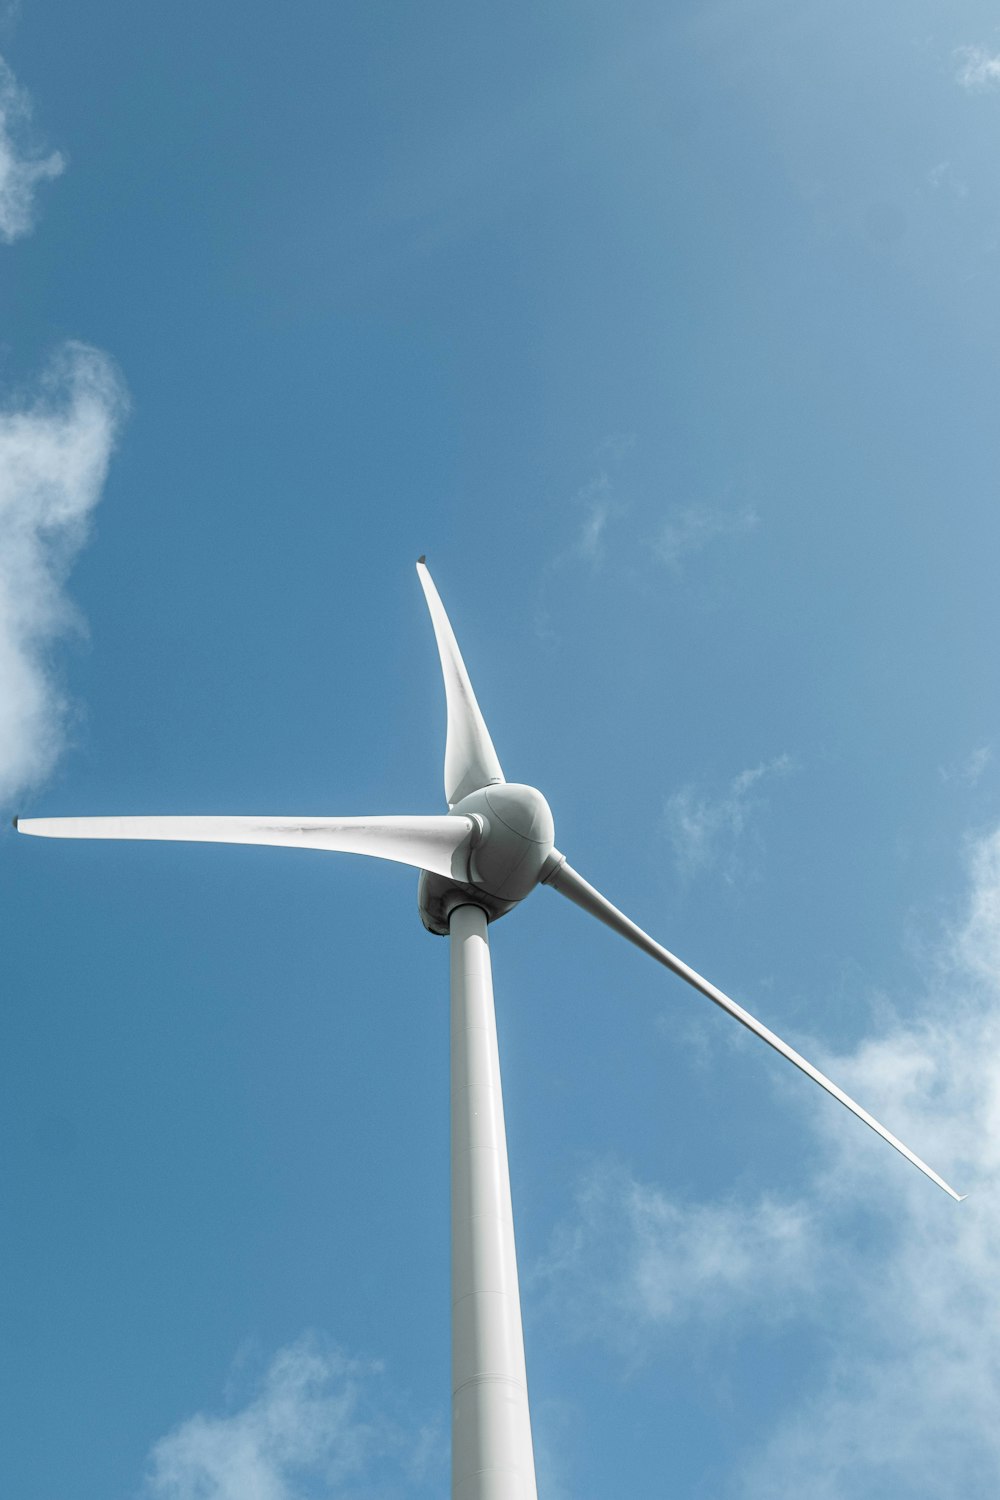 a wind turbine is shown against a blue sky